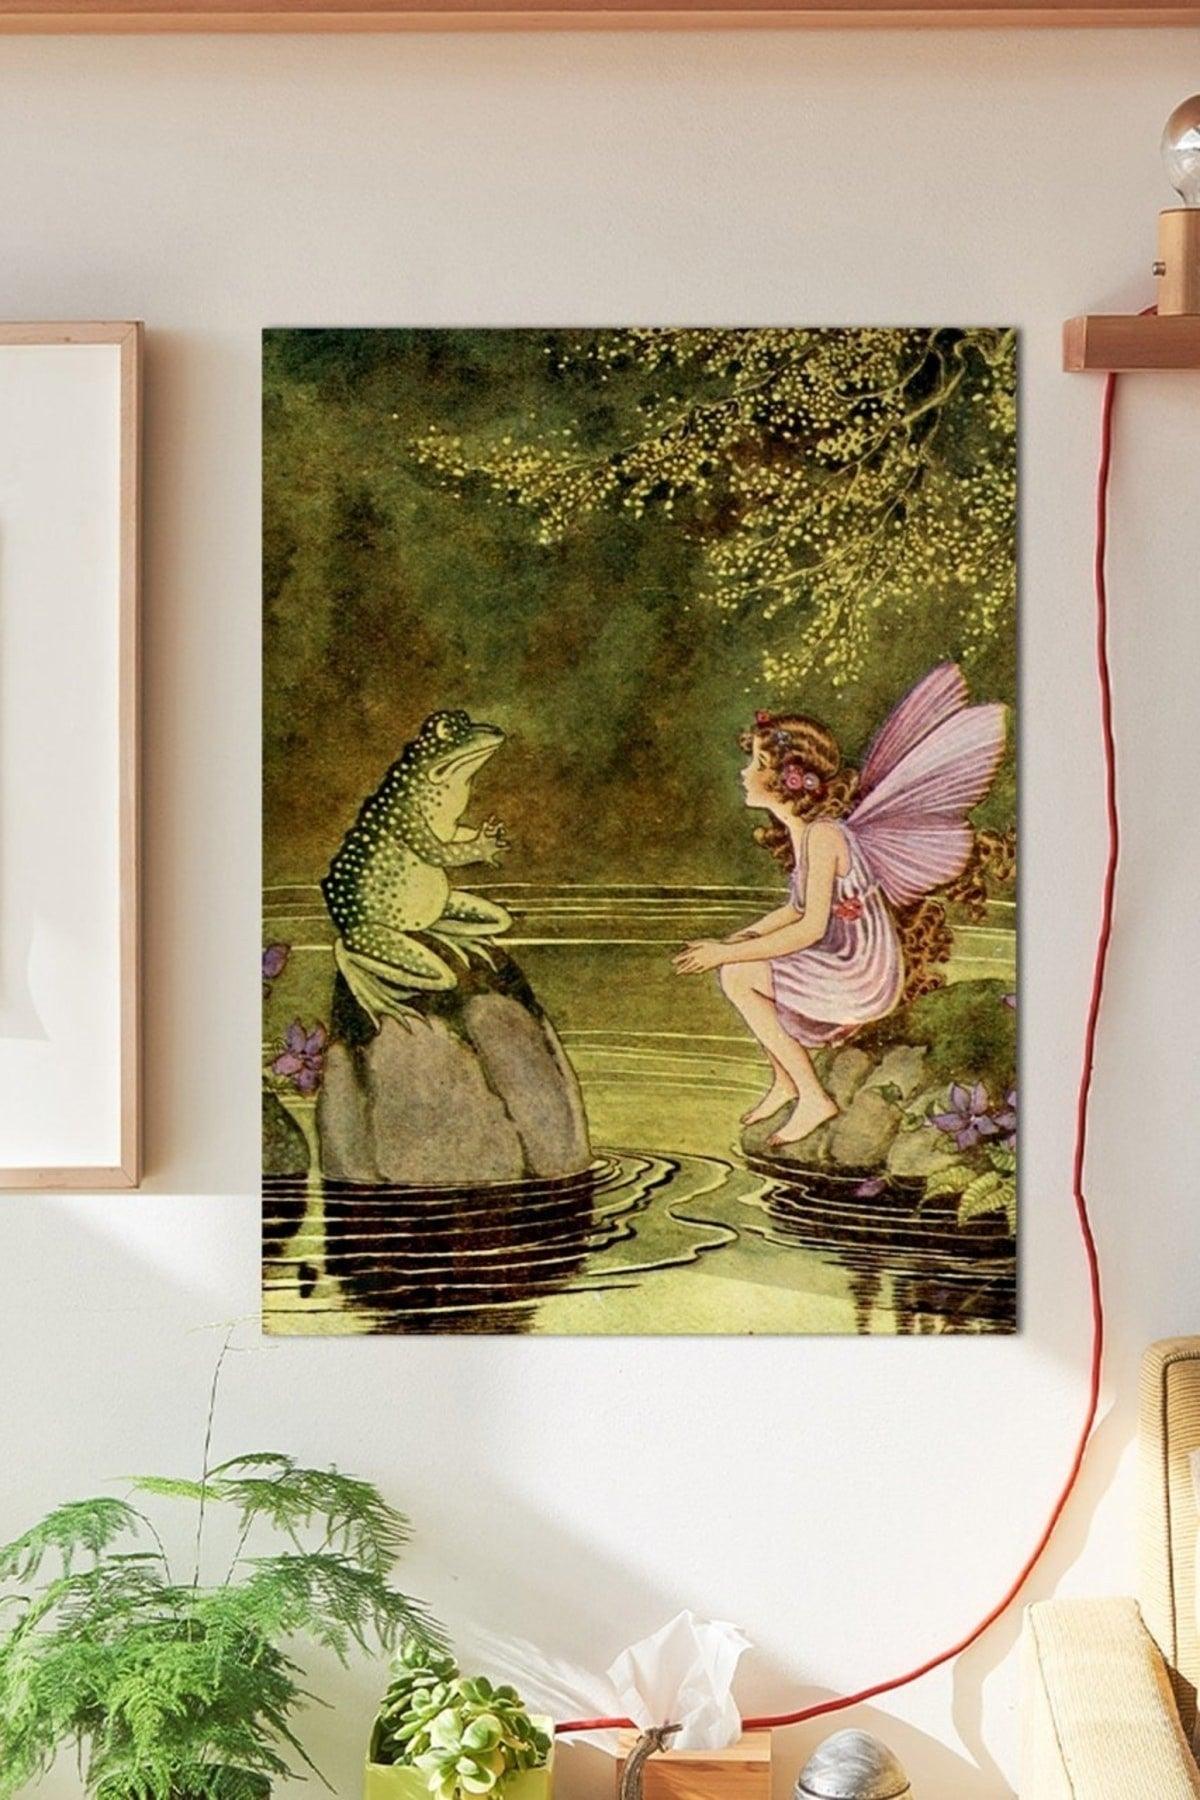 Frog Pixie Wall Poster Large 45x30 Cm - Swordslife